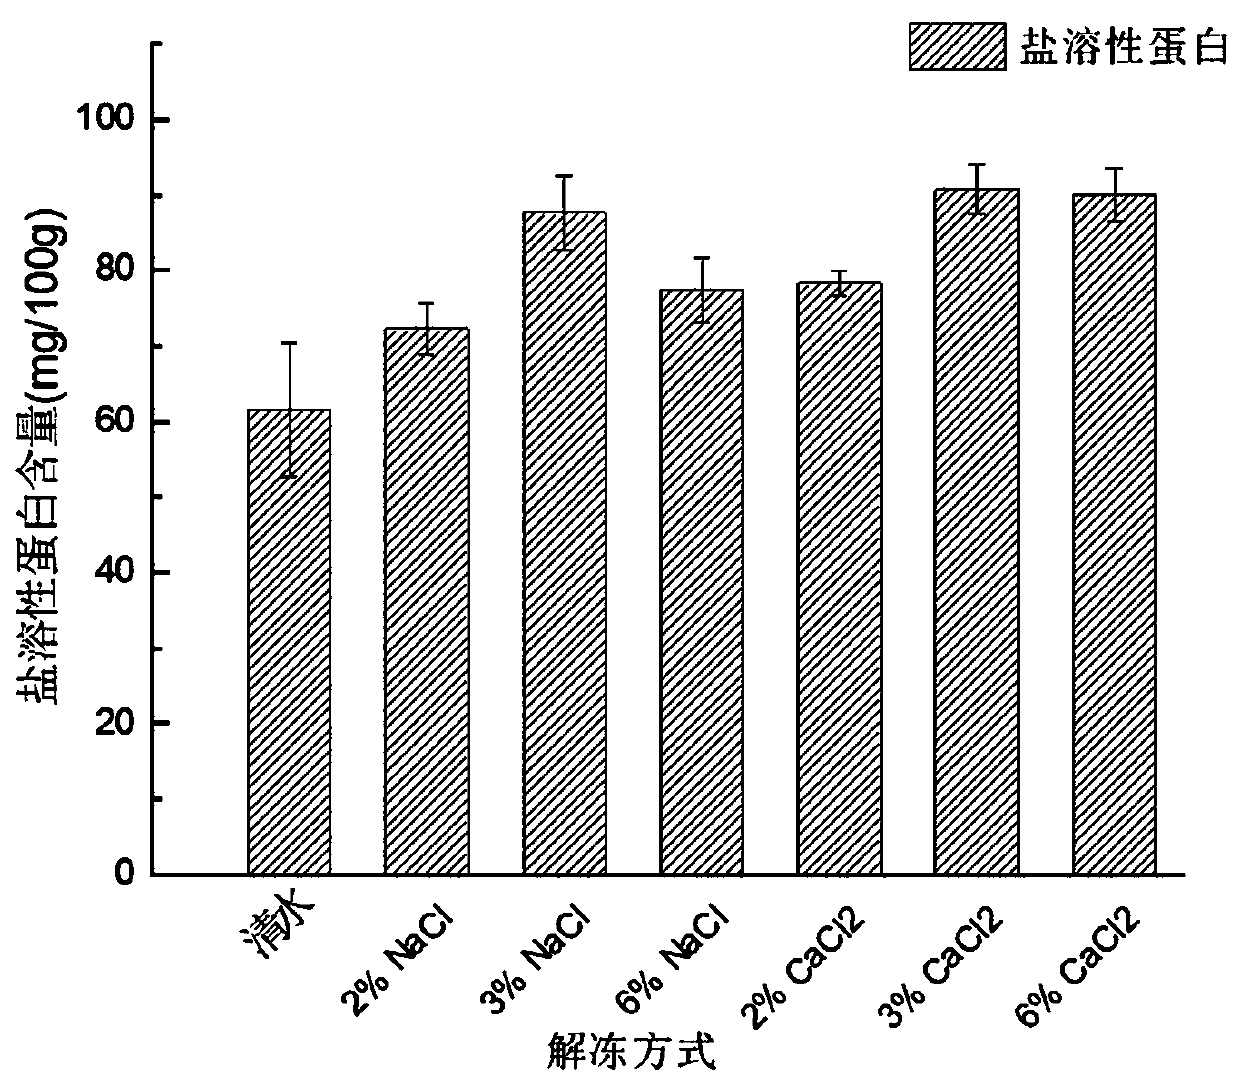 Method for thawing tuna by using CaCl2 static aqueous solution with low salt permeability